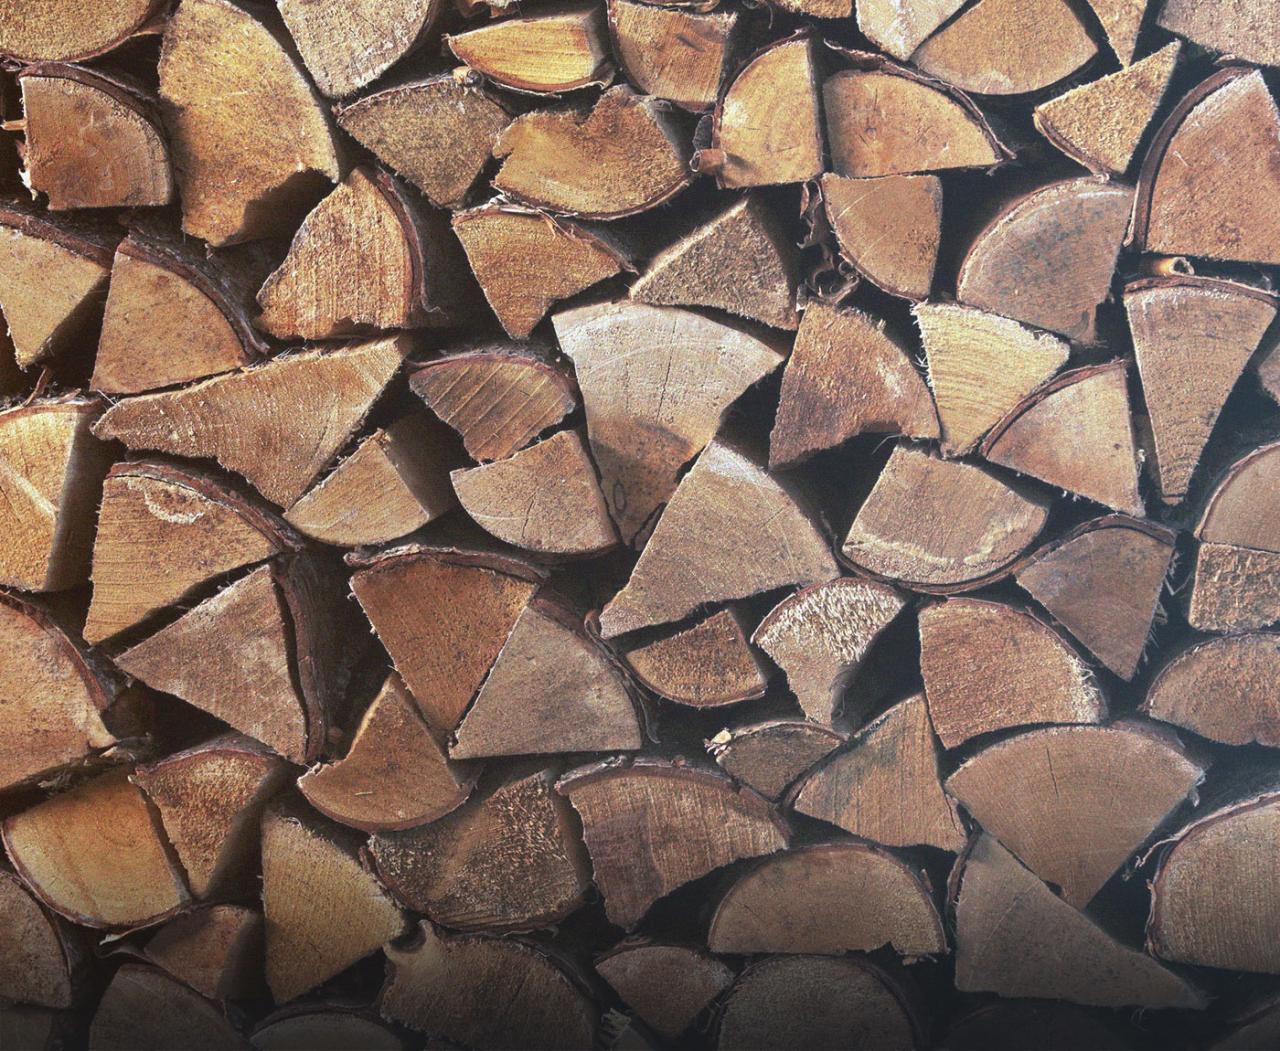 Firewood production and distribution 